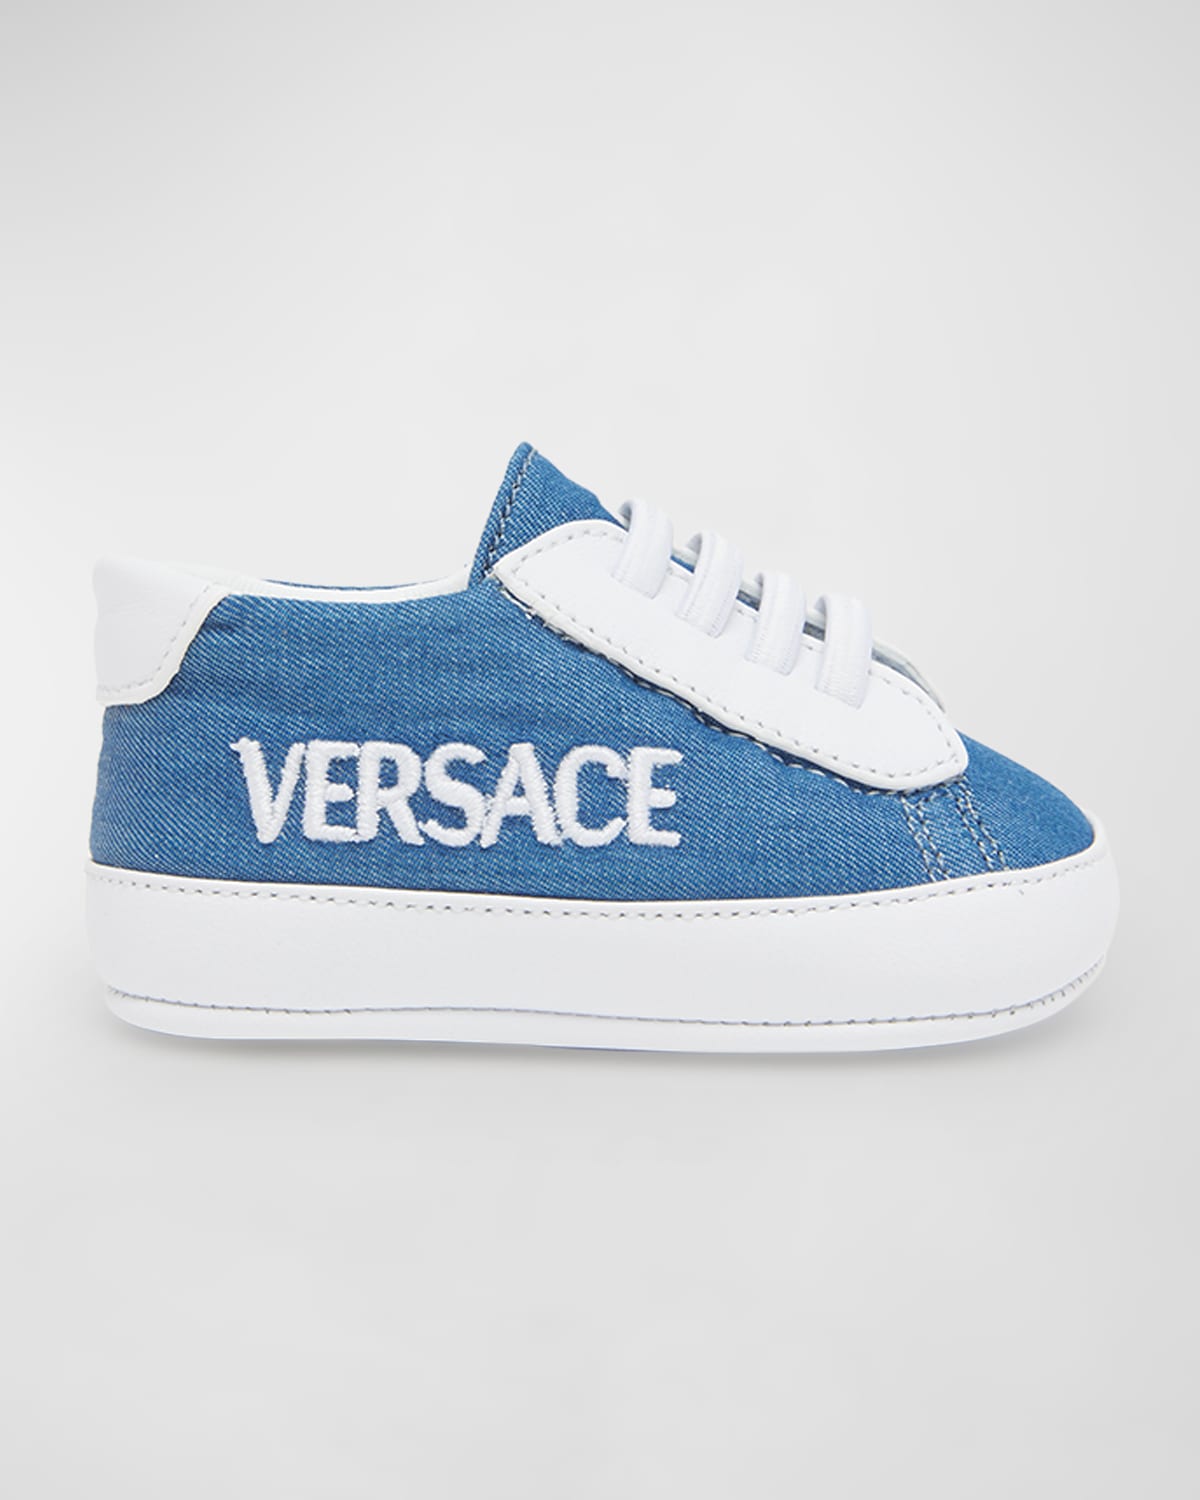 Versace Kids' Boy's Leather And Fabric Logo Sneakers, Baby In Denim